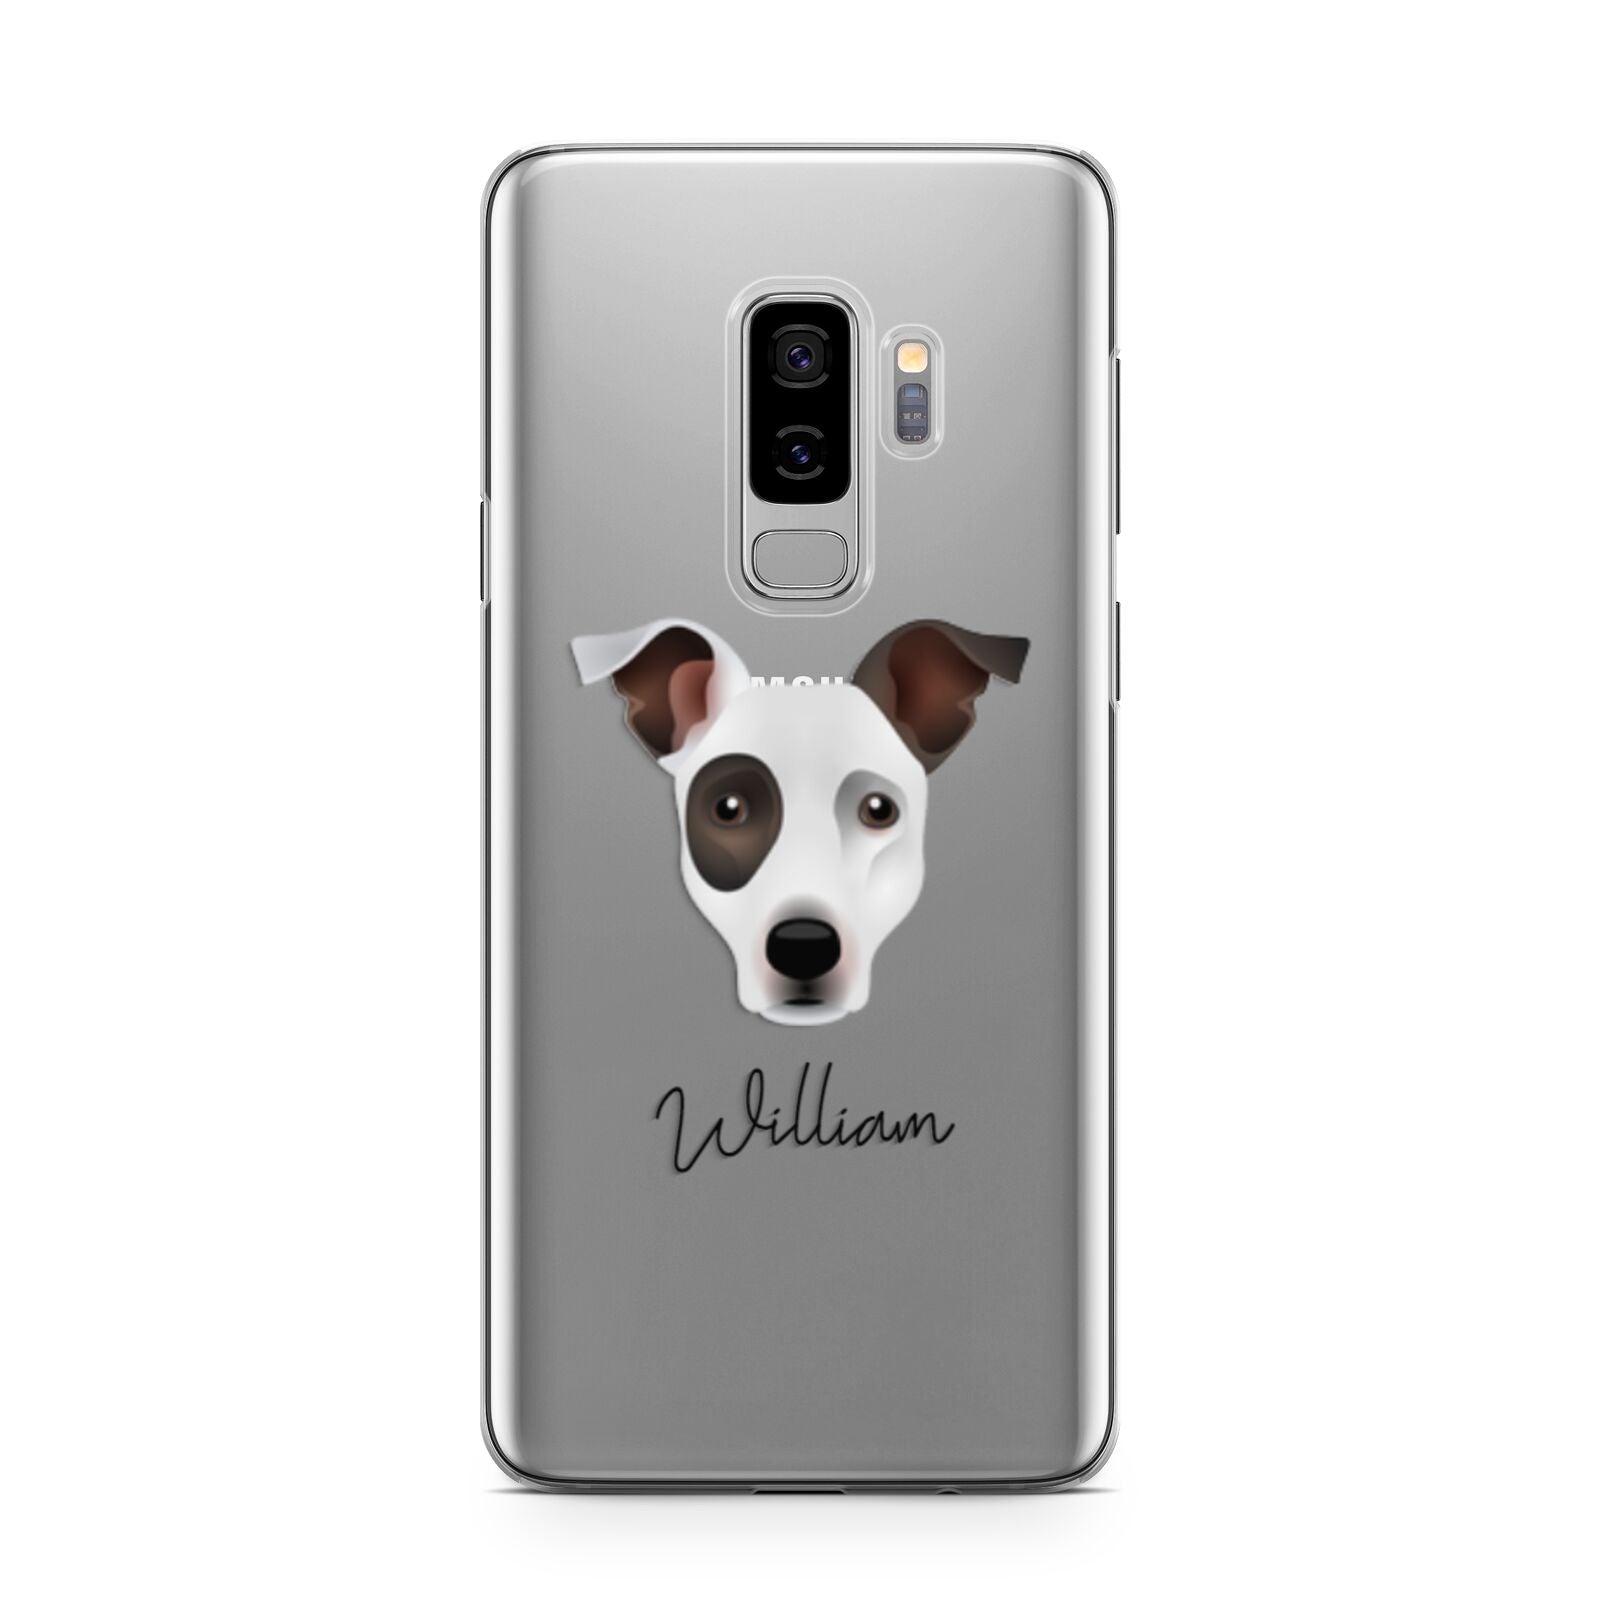 Staffy Jack Personalised Samsung Galaxy S9 Plus Case on Silver phone